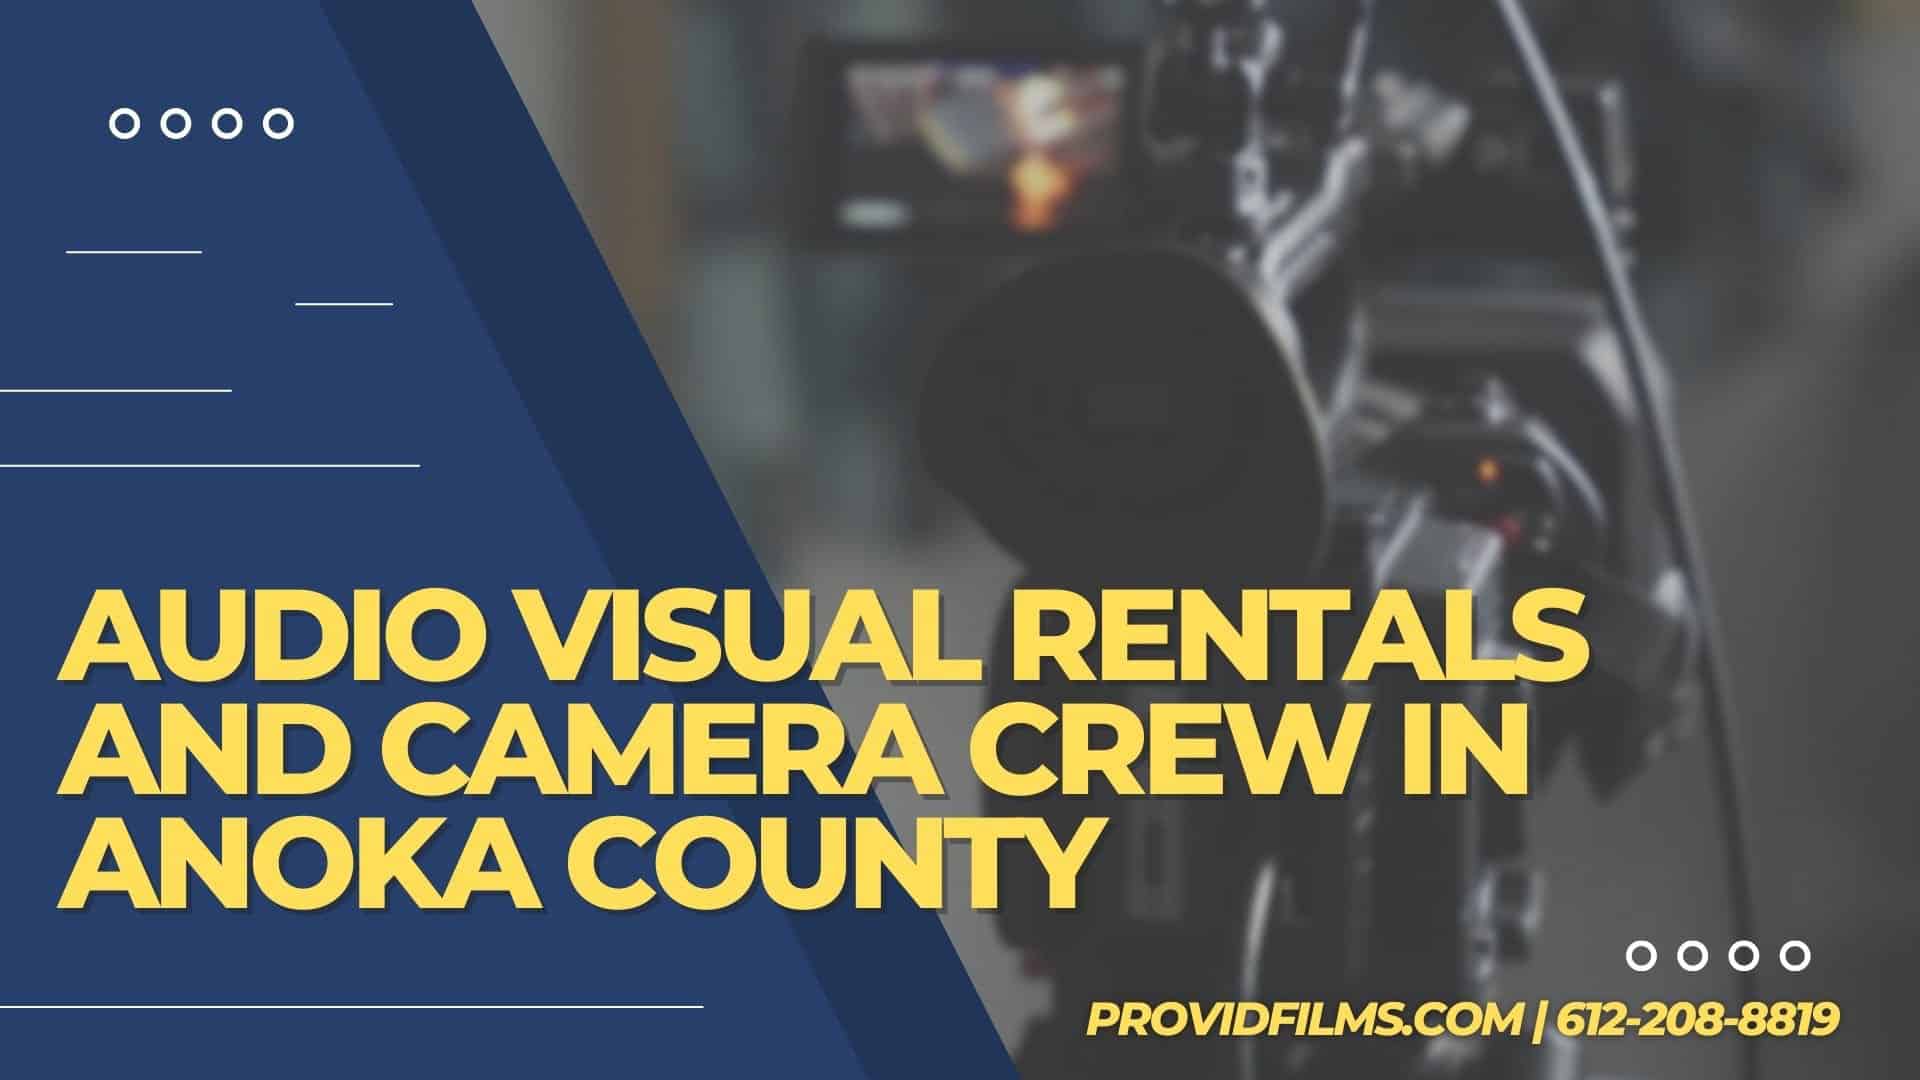 Graphic with a video camera crew with the text saying "AV Rental and Camera Crew in Anoka County MN"